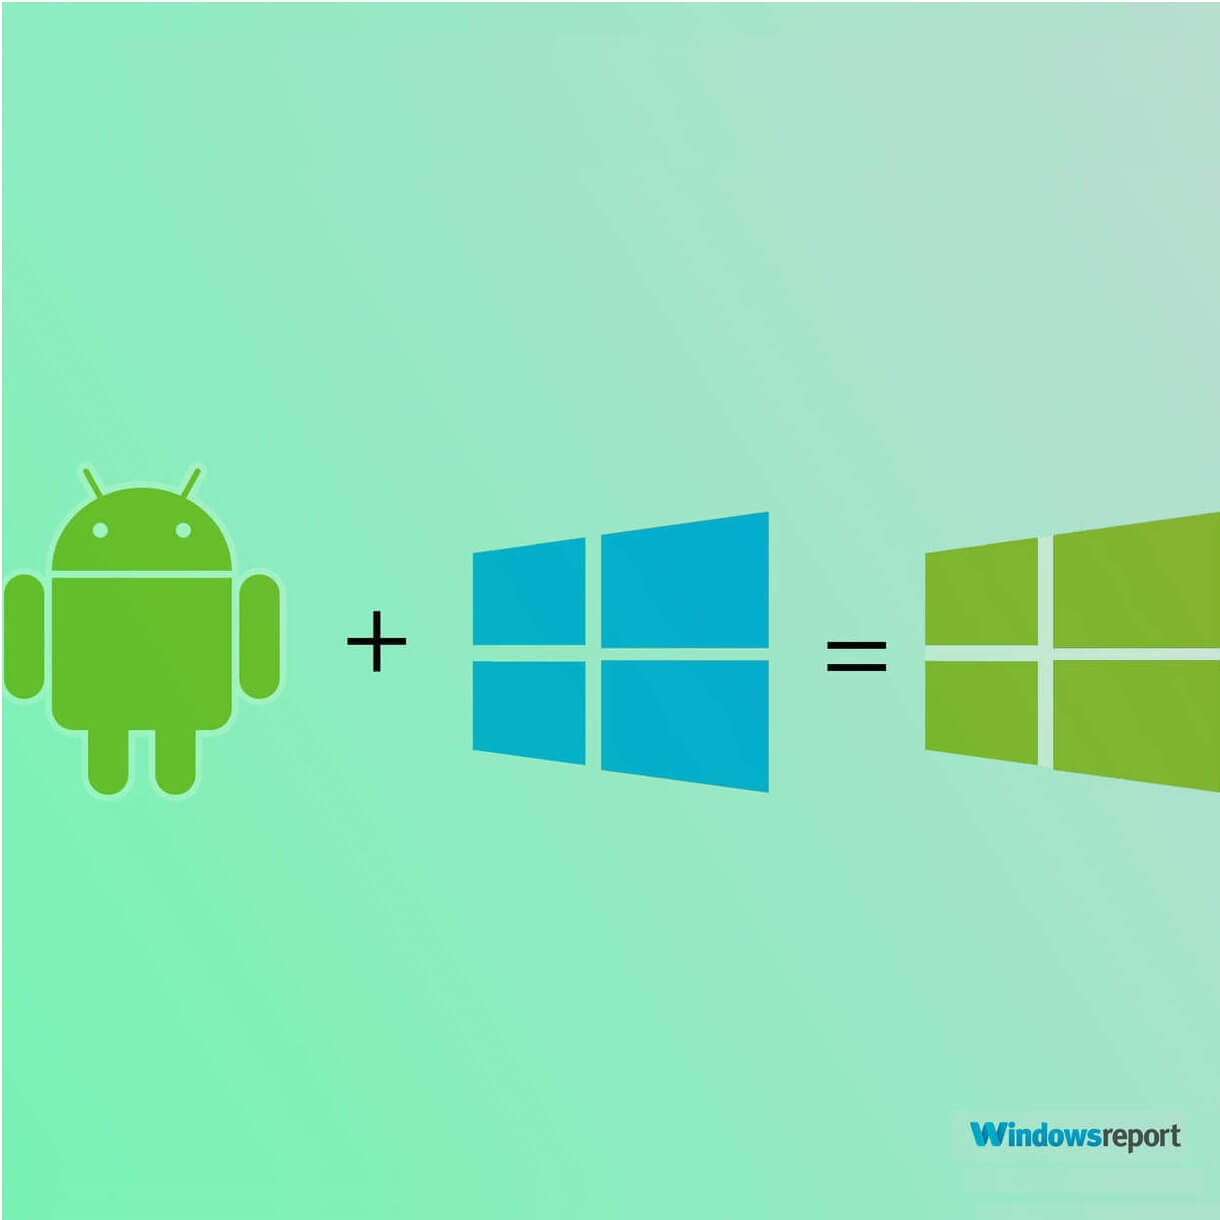 windows emulator for android